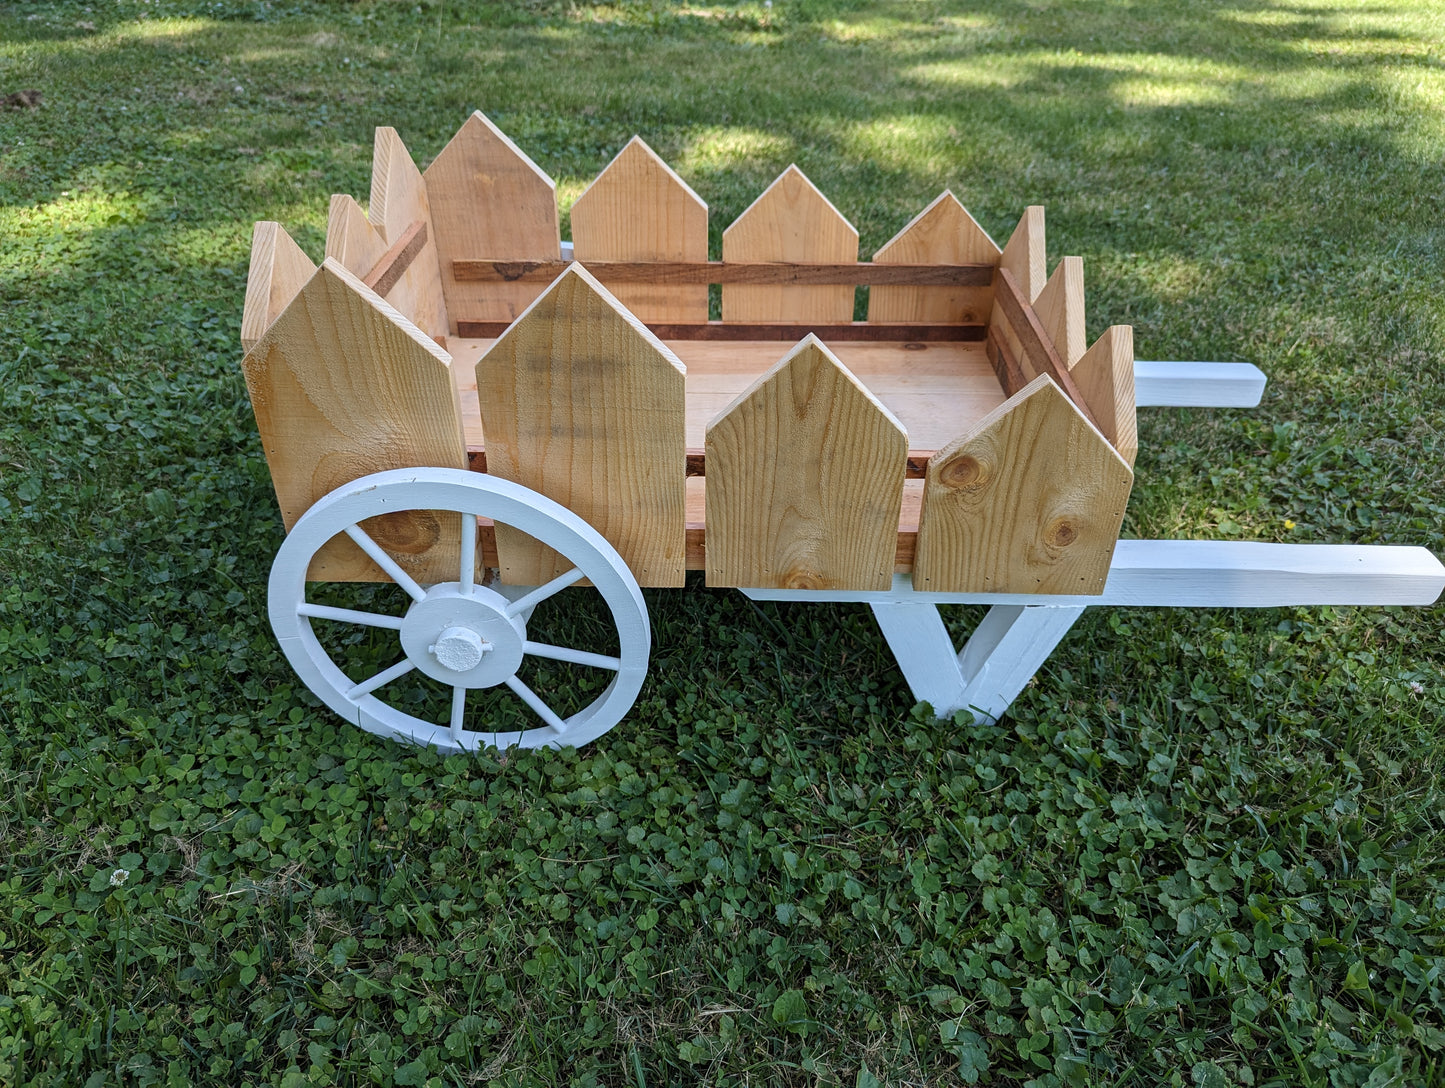 Flower Cart for yard decoration made with cedar and red oak